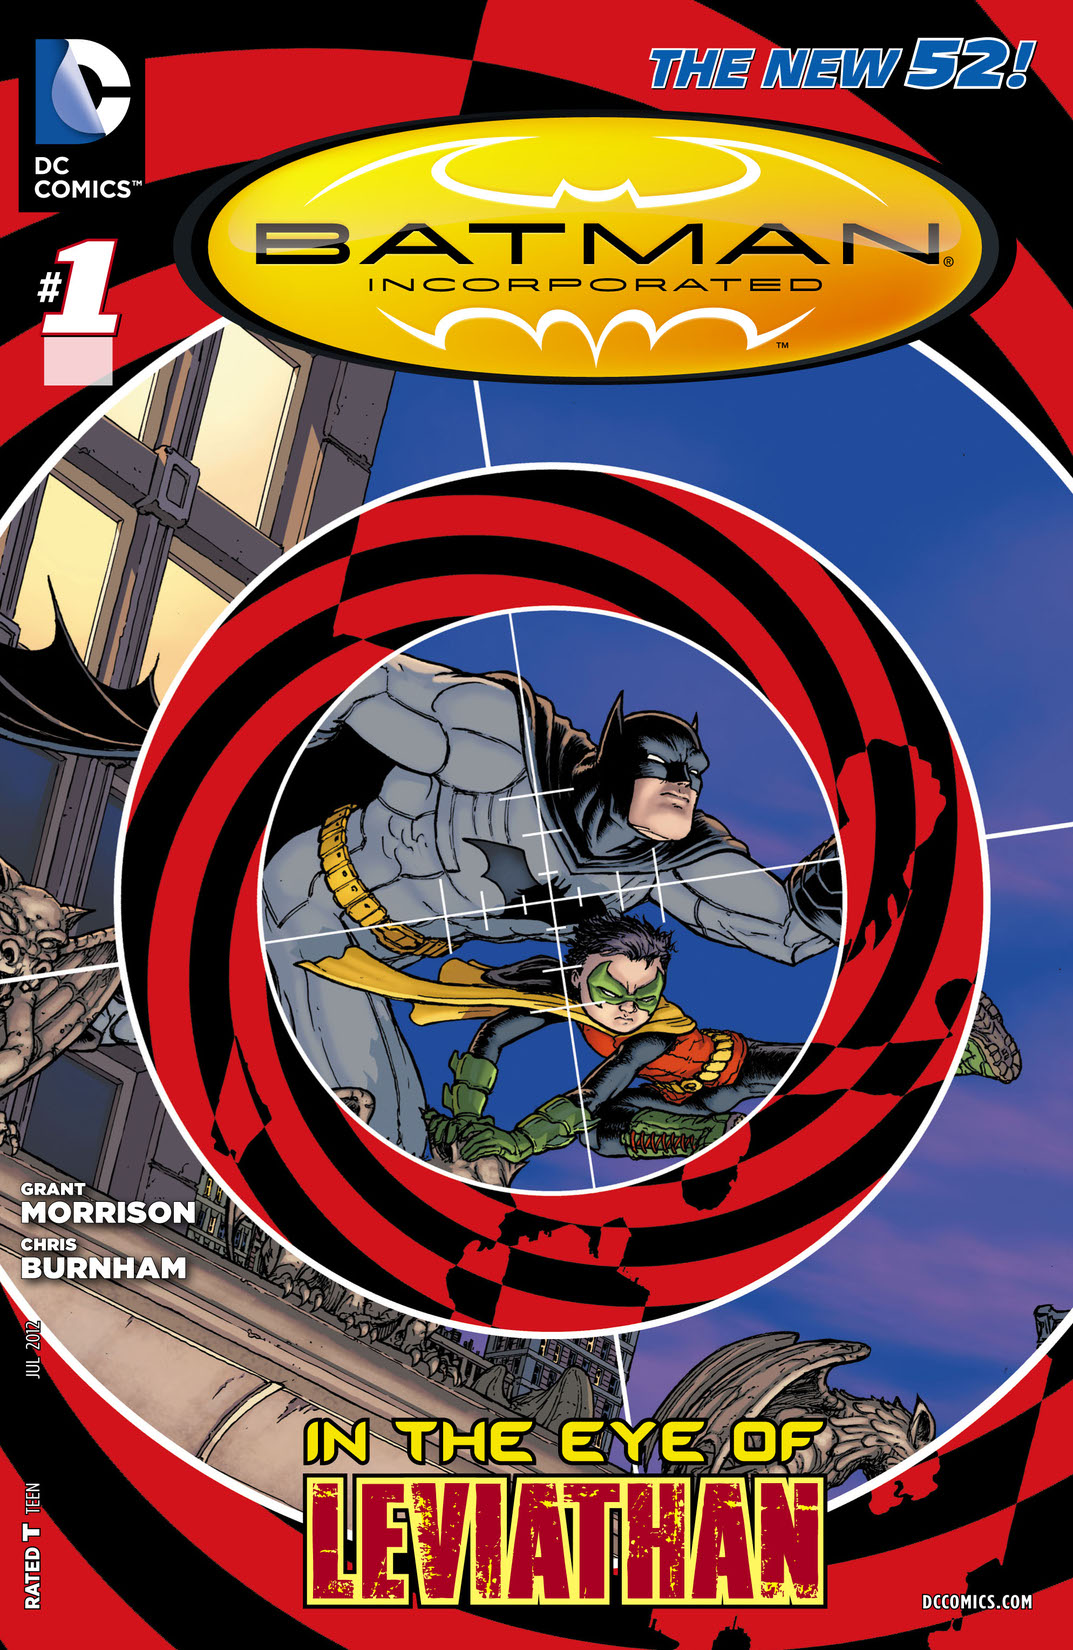 Batman Incorporated (2012-) #1 preview images